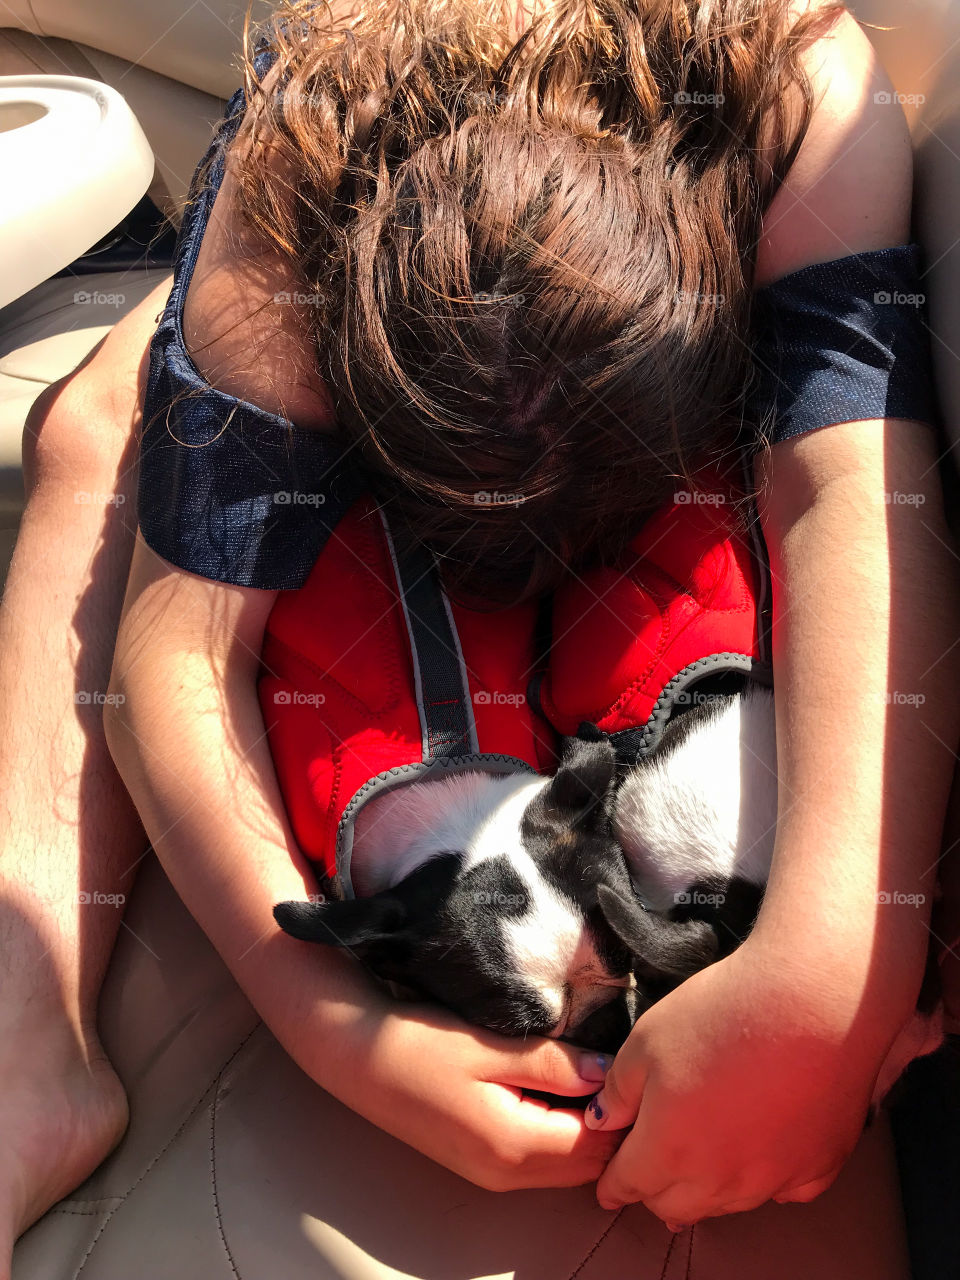 This summer when we rented a pontoon boat to play out on the lake even the pups went swimming in their new life jackets. Our dogs are not big water fans & were not happy. My daughter gave them cuddles while they warmed up in the midday sun. ☀️